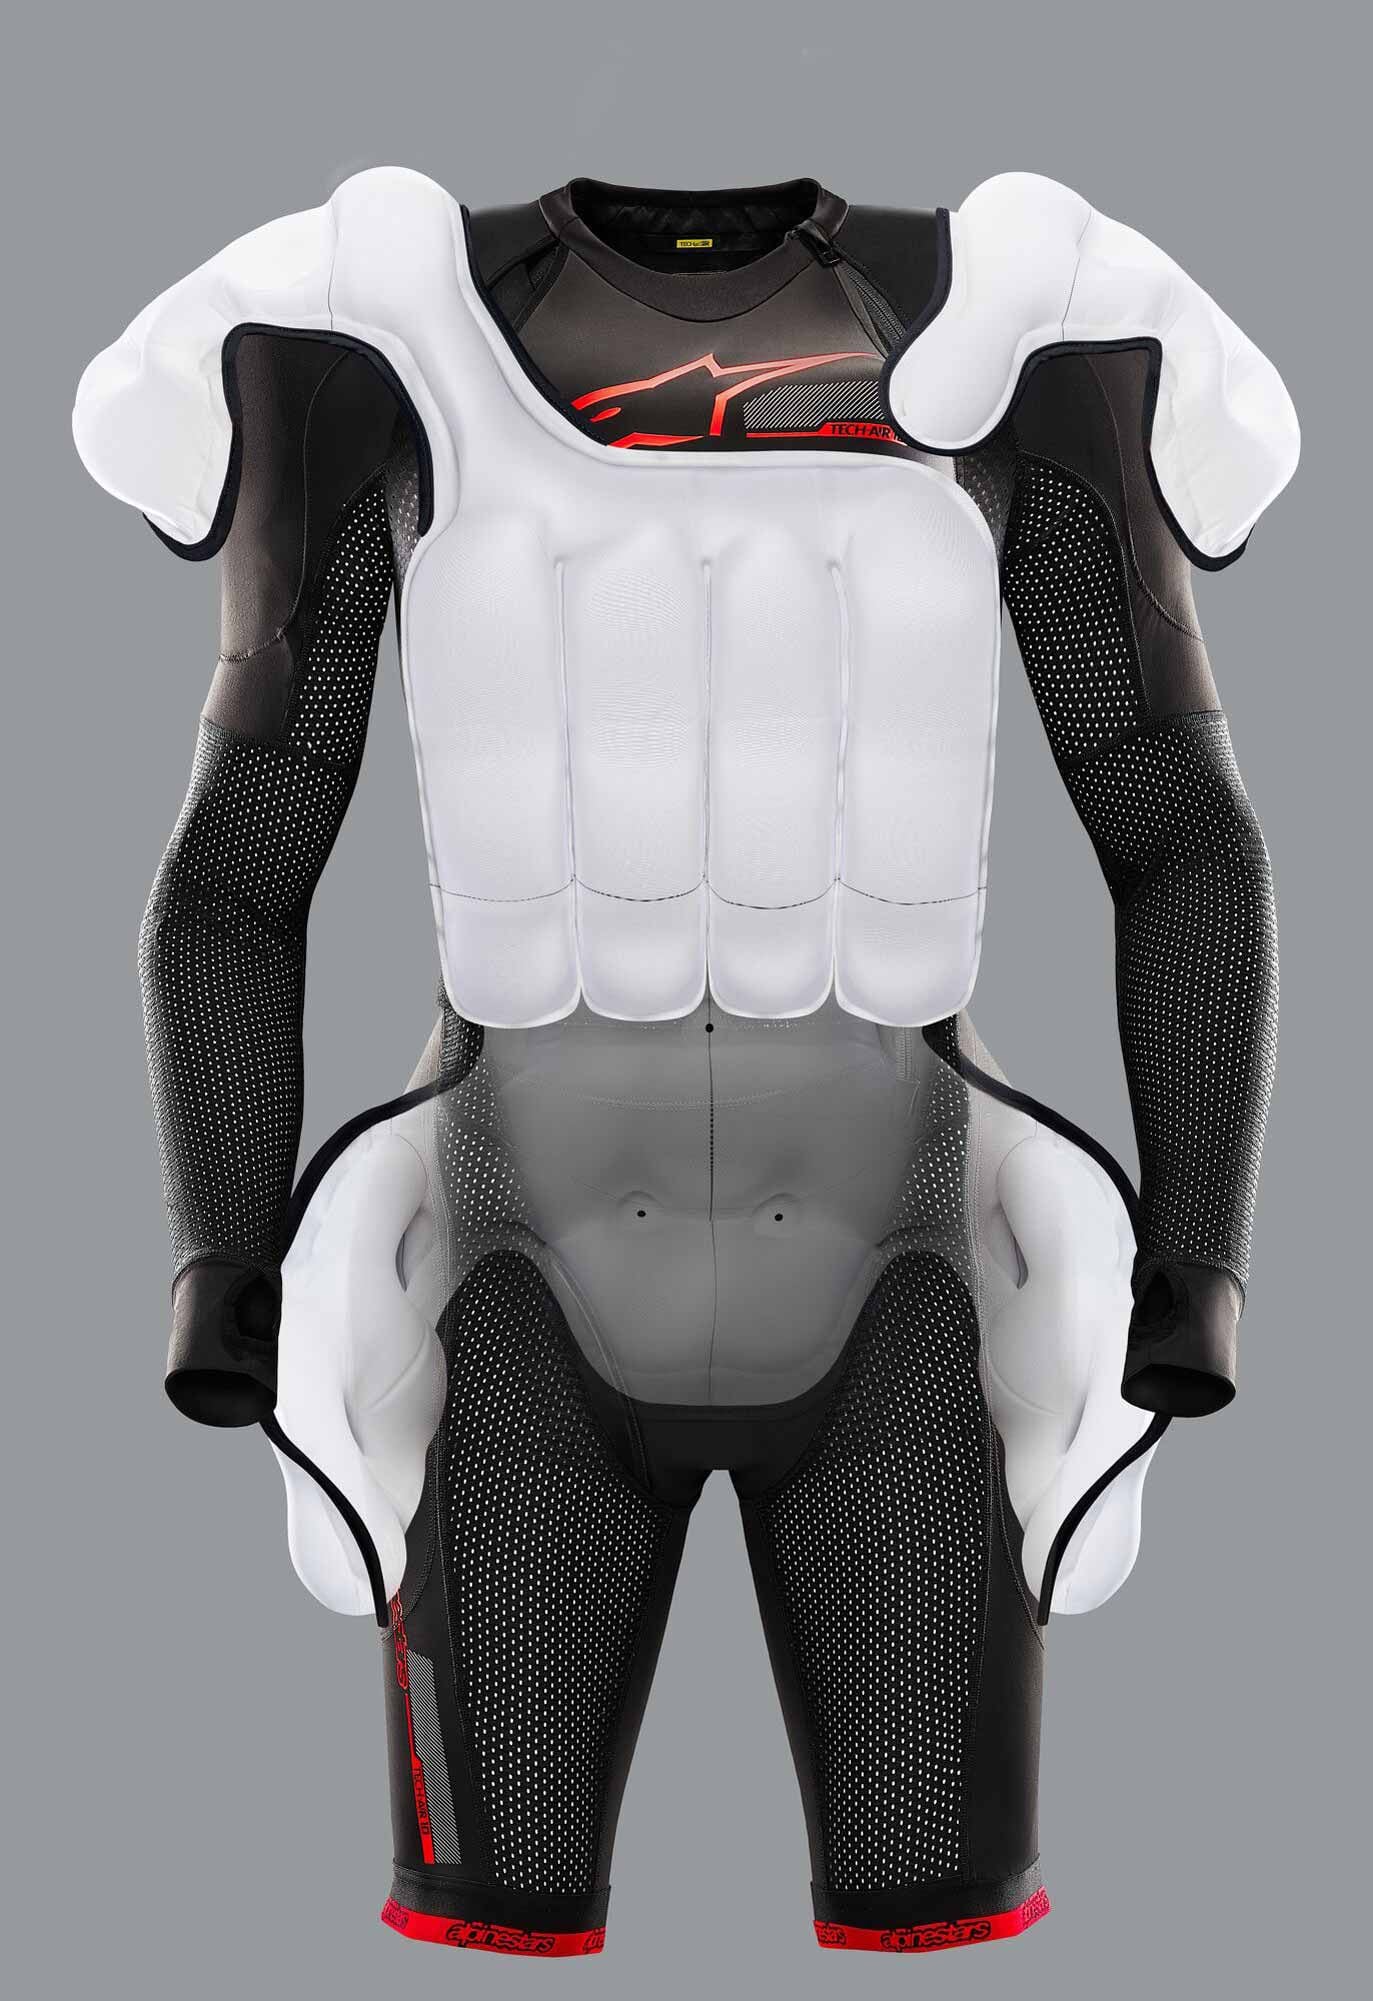 The advanced airbag system deploys full upper body and hip protection in the event of a crash.